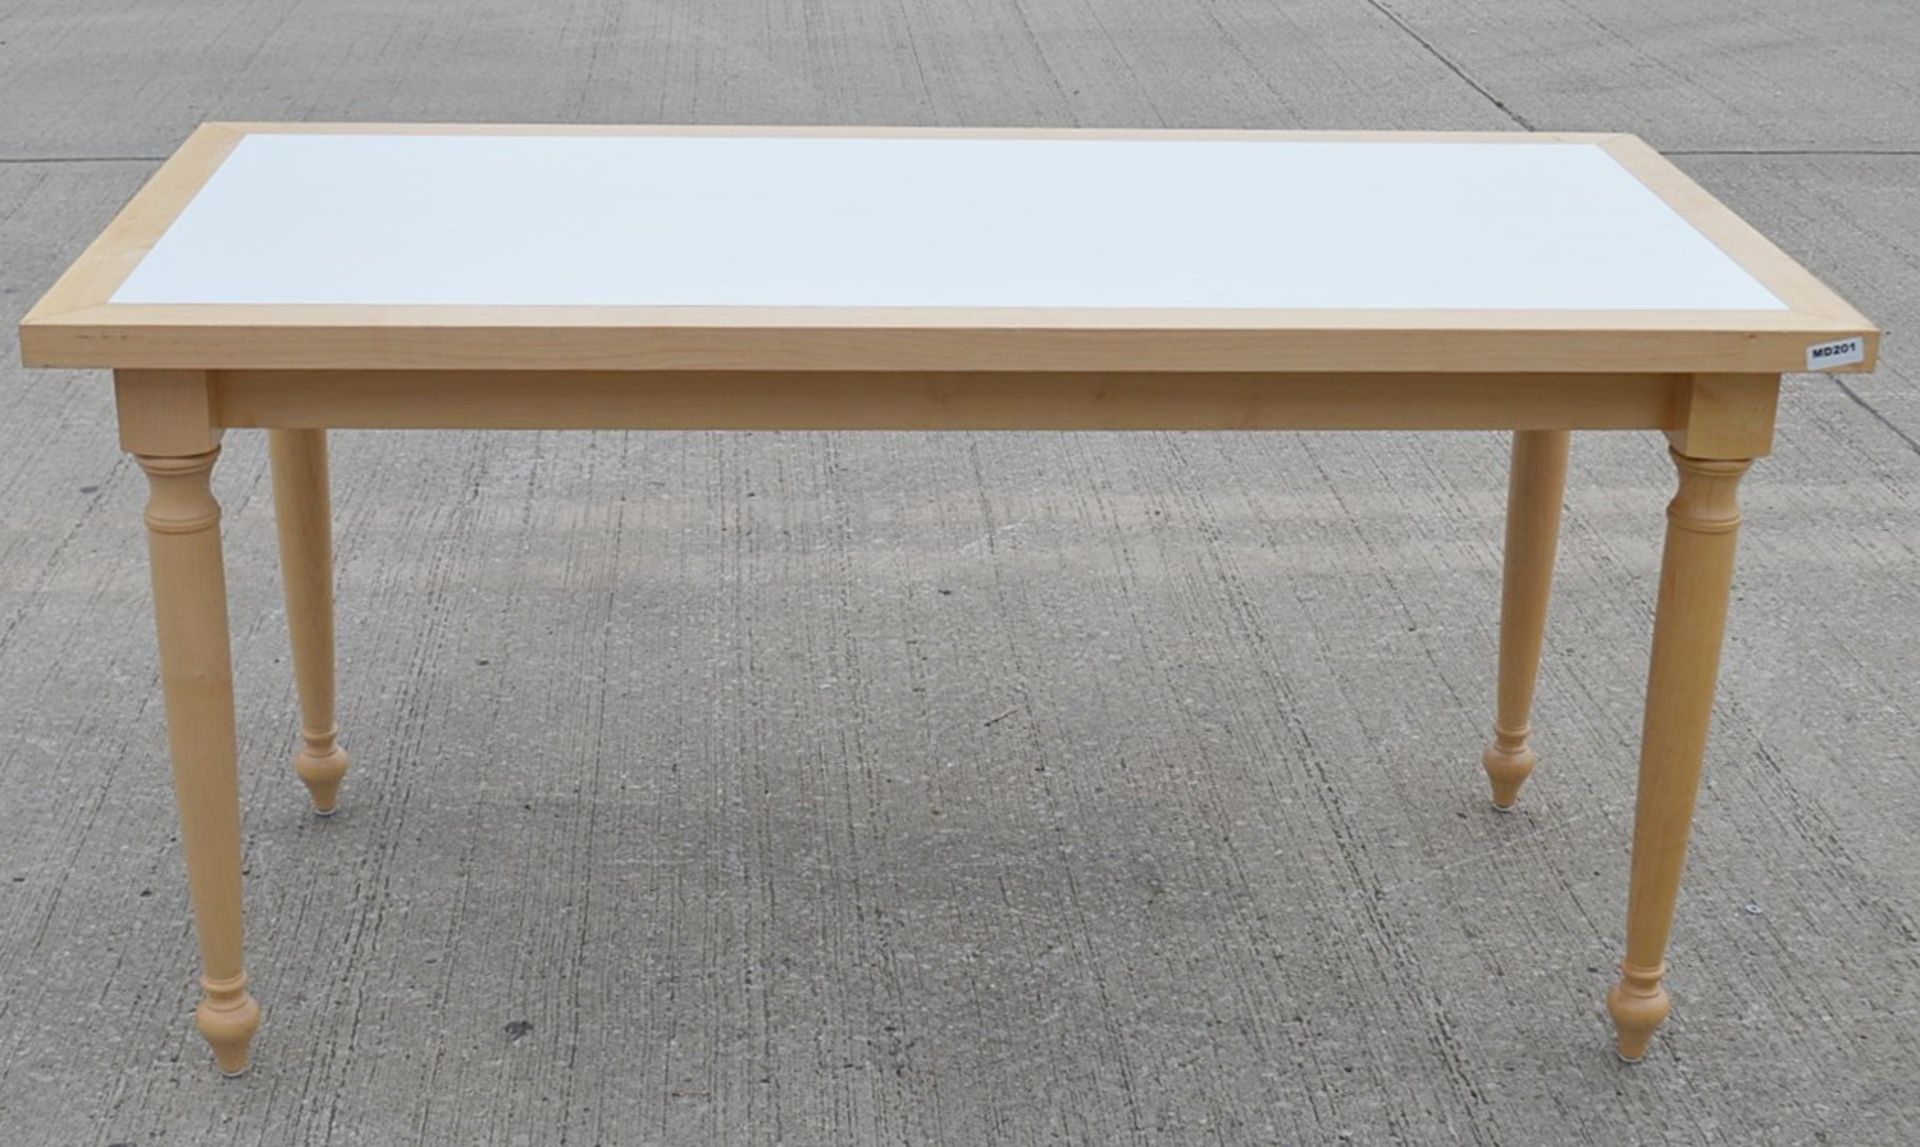 1 x Large Rectangular Event Table In Beech - Features Attractive Turned Legs And A White Inlay